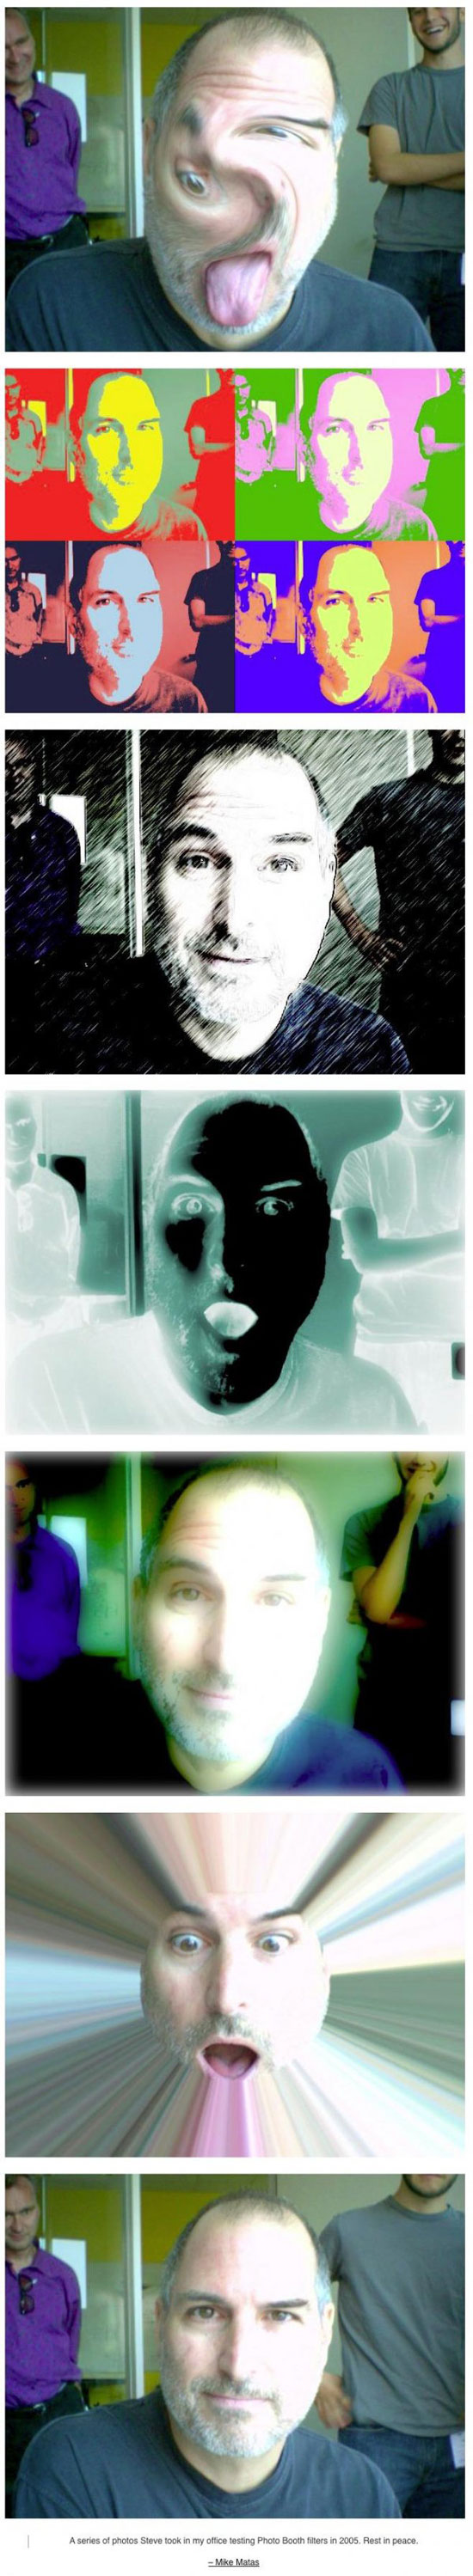 steve jobs testing photo booth filters in 2005